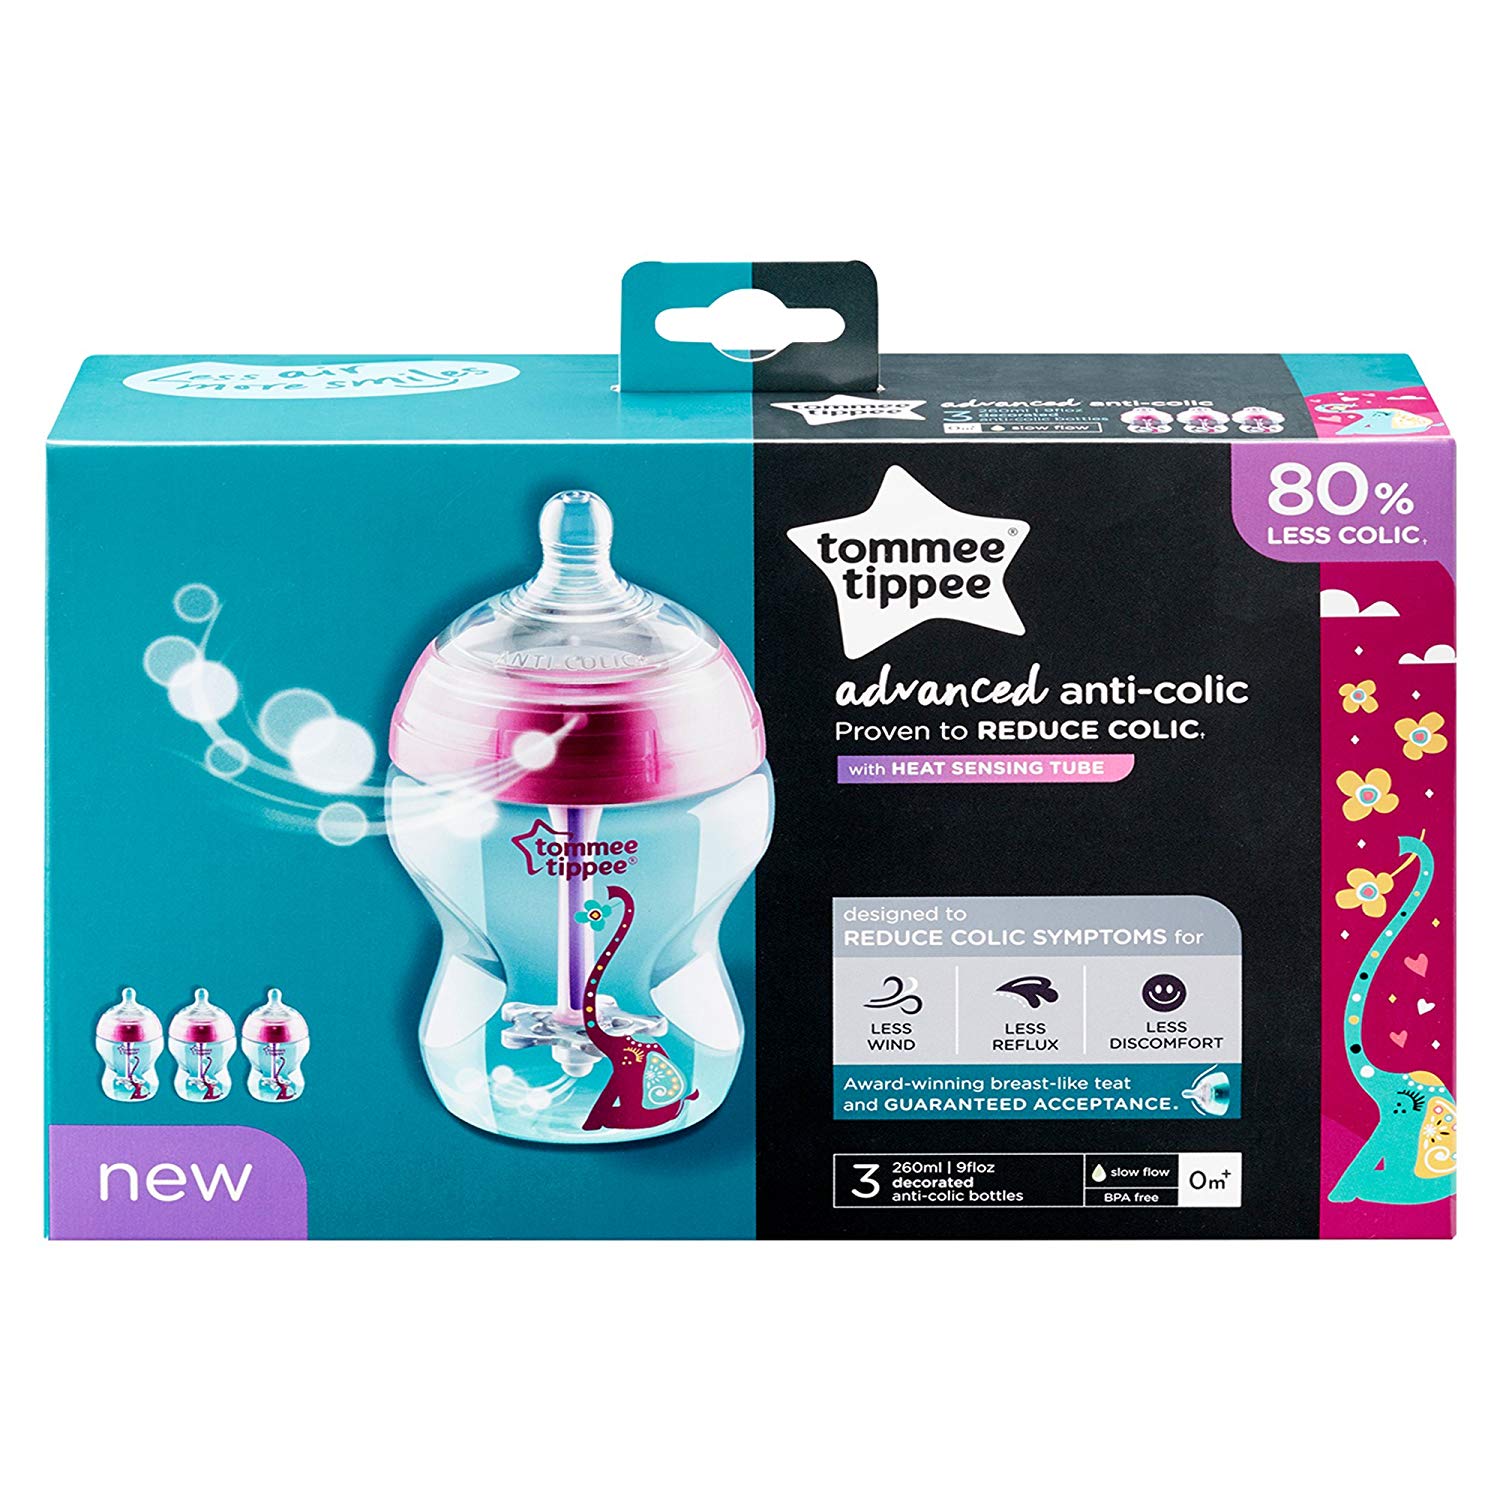 3 count... 260 ml Tommee Tippee Decorated Advanced Anti-Colic Baby Bottles 